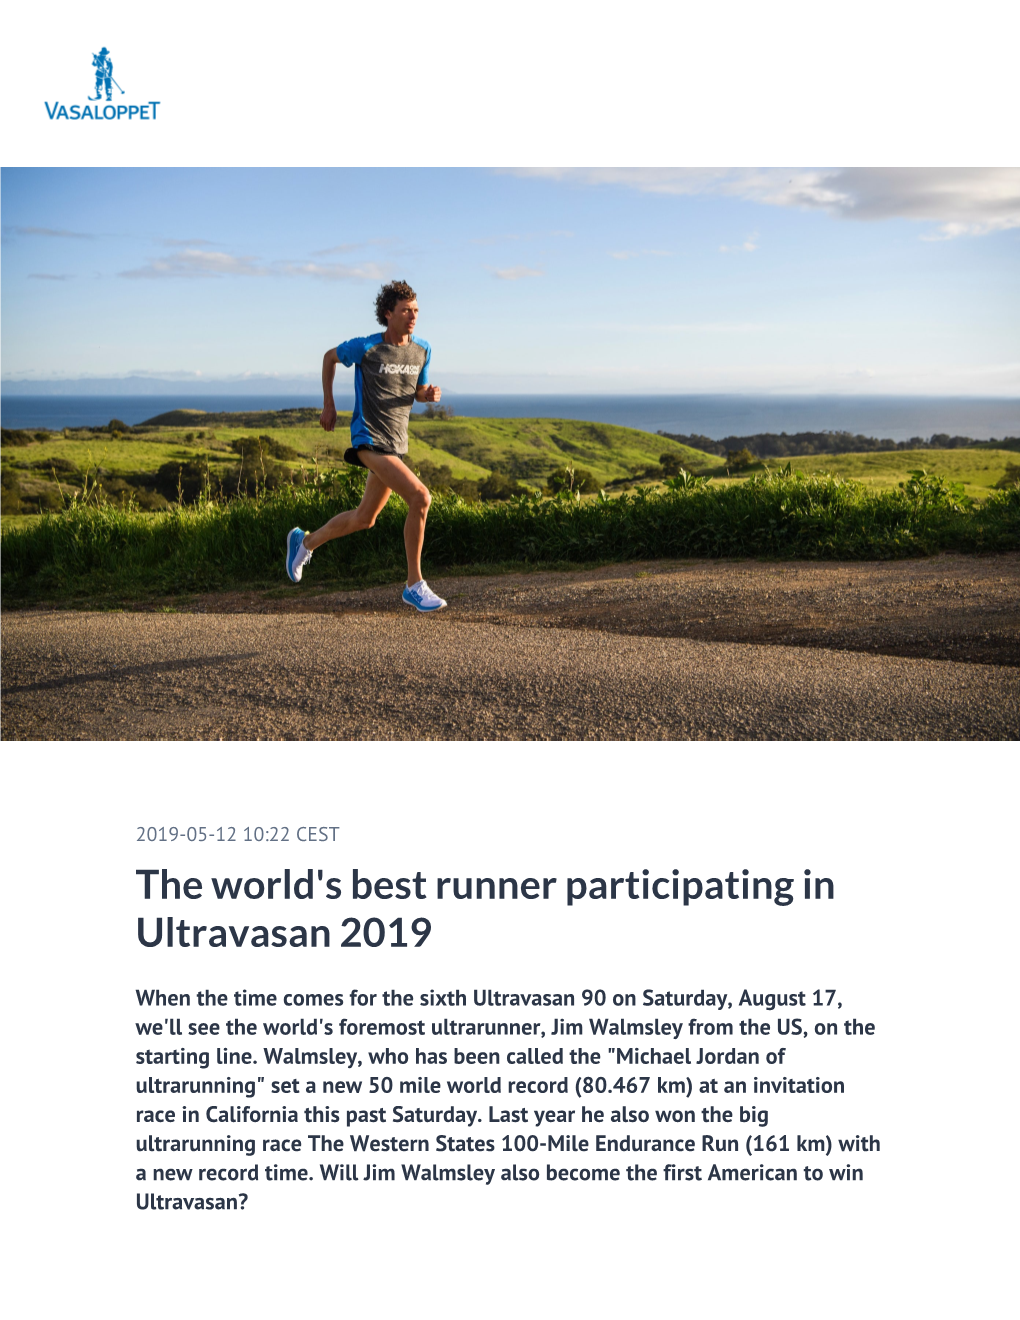 The World's Best Runner Participating in Ultravasan 2019